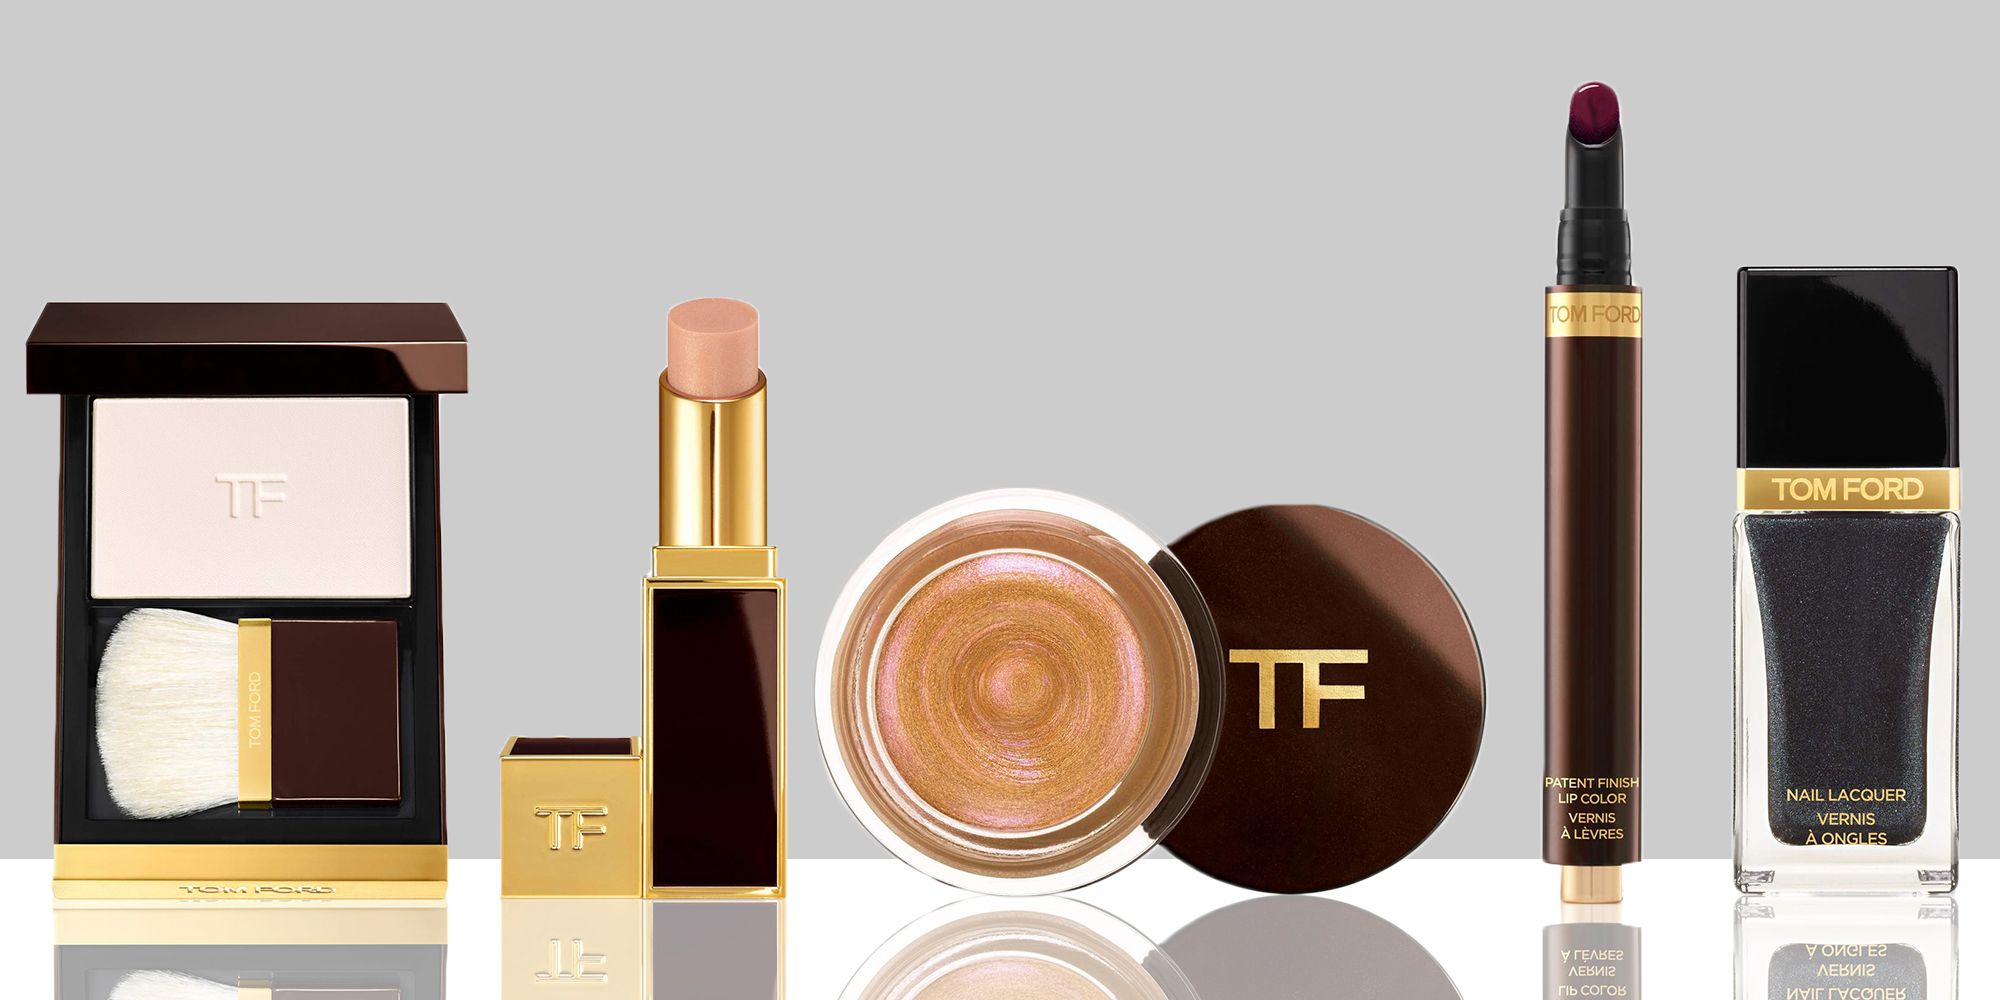 1452877112-tom-ford-makeup-beauty-products.jpg